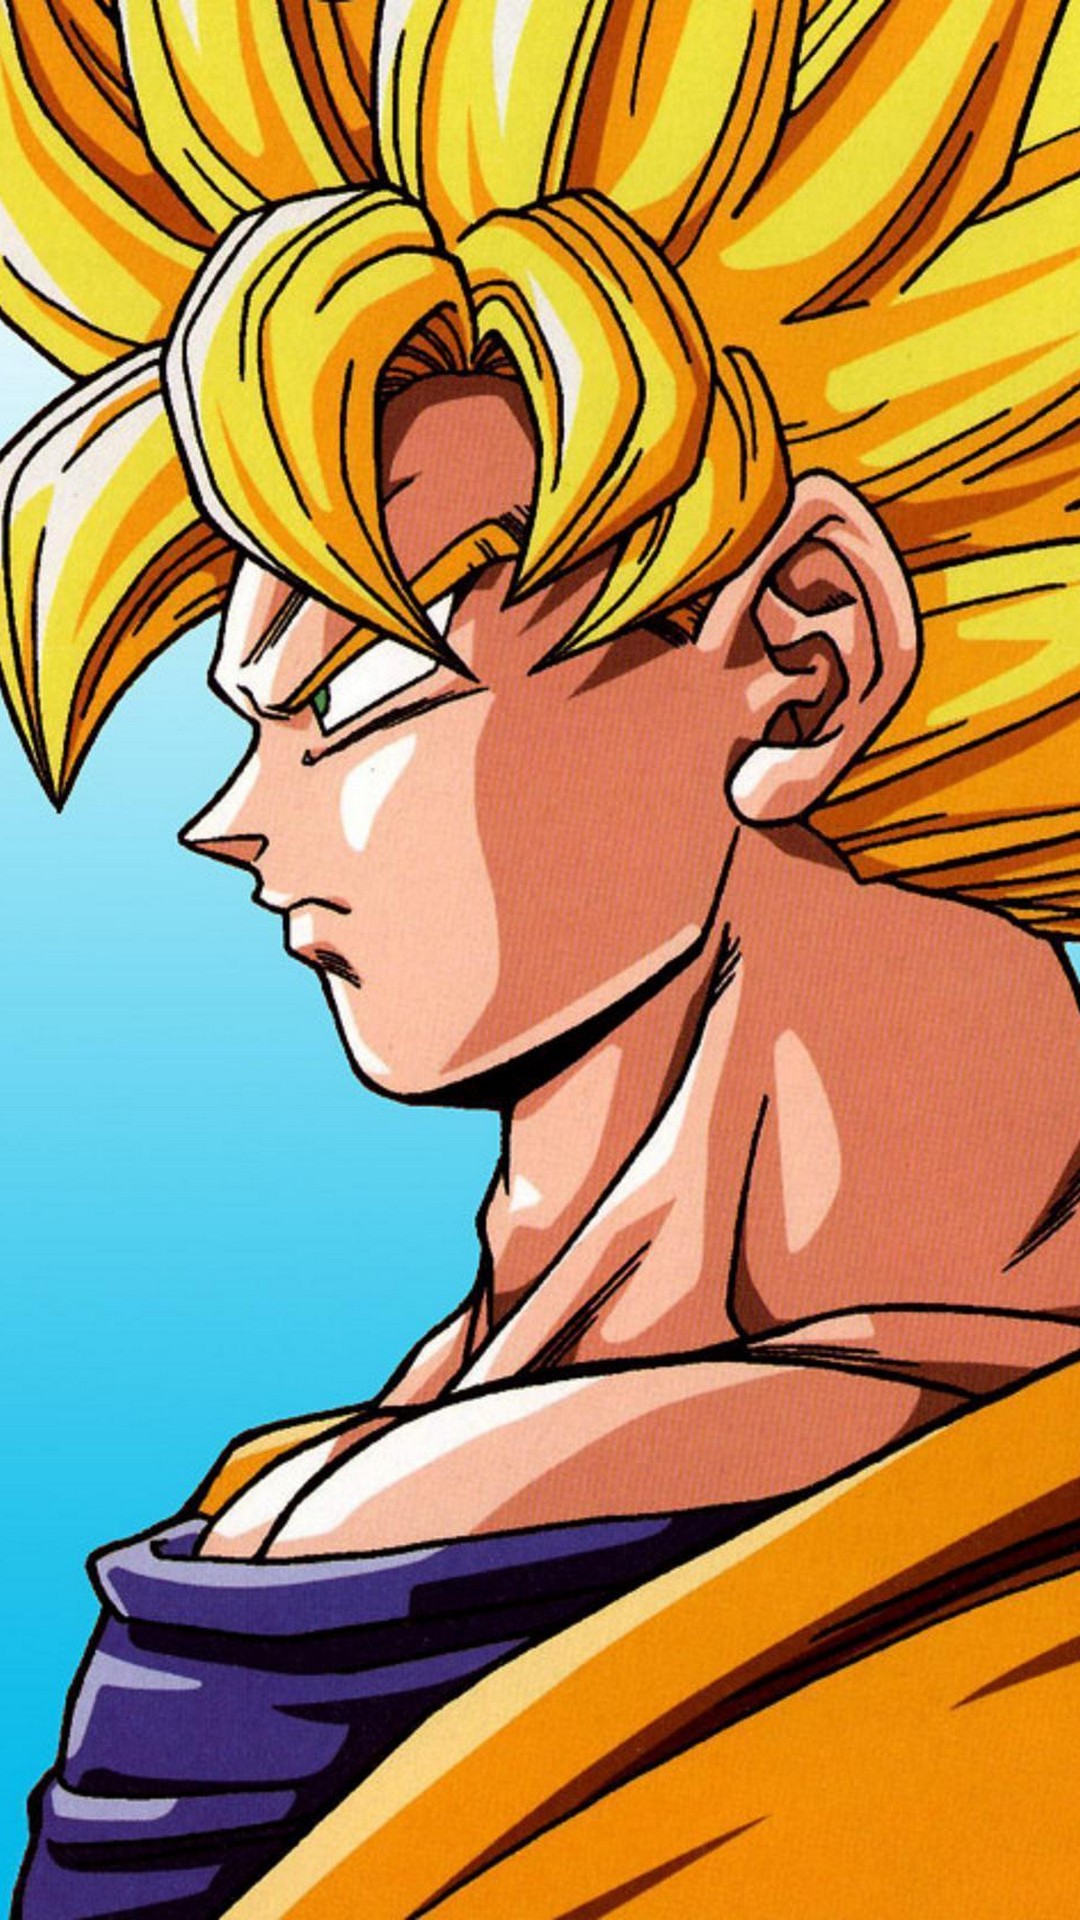 Goku Super Saiyan iPhone Wallpaper with image resolution 1080x1920 pixel. You can make this wallpaper for your iPhone 5, 6, 7, 8, X backgrounds, Mobile Screensaver, or iPad Lock Screen